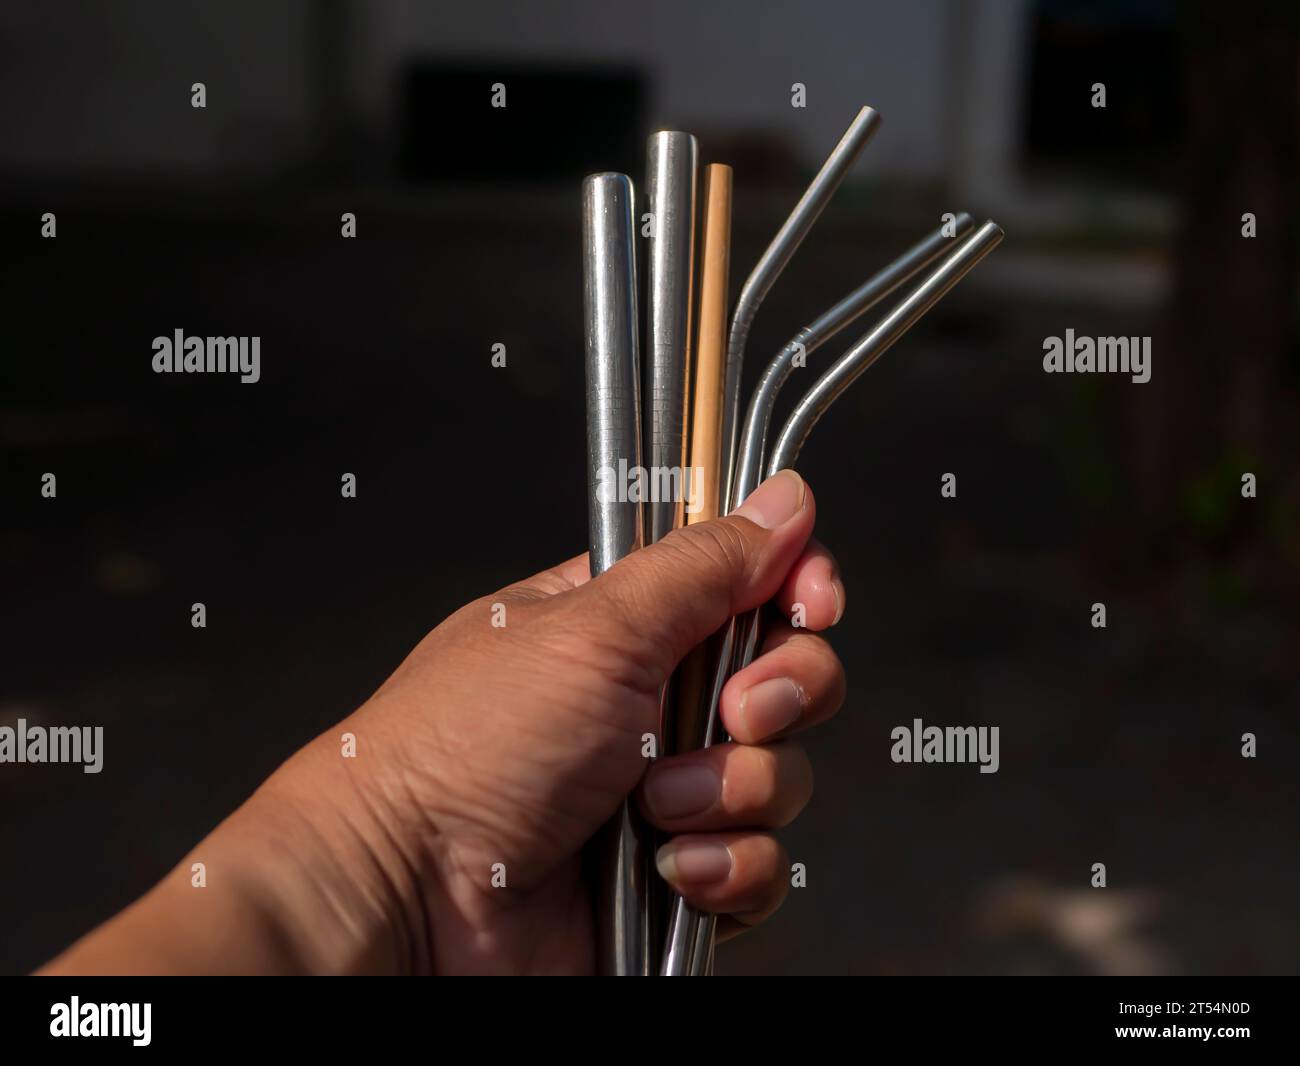 A hand holding bamboo and steel straws, an alternative to reducing plastic straws. The concept of reducing non-degradable plastic waste. Stock Photo